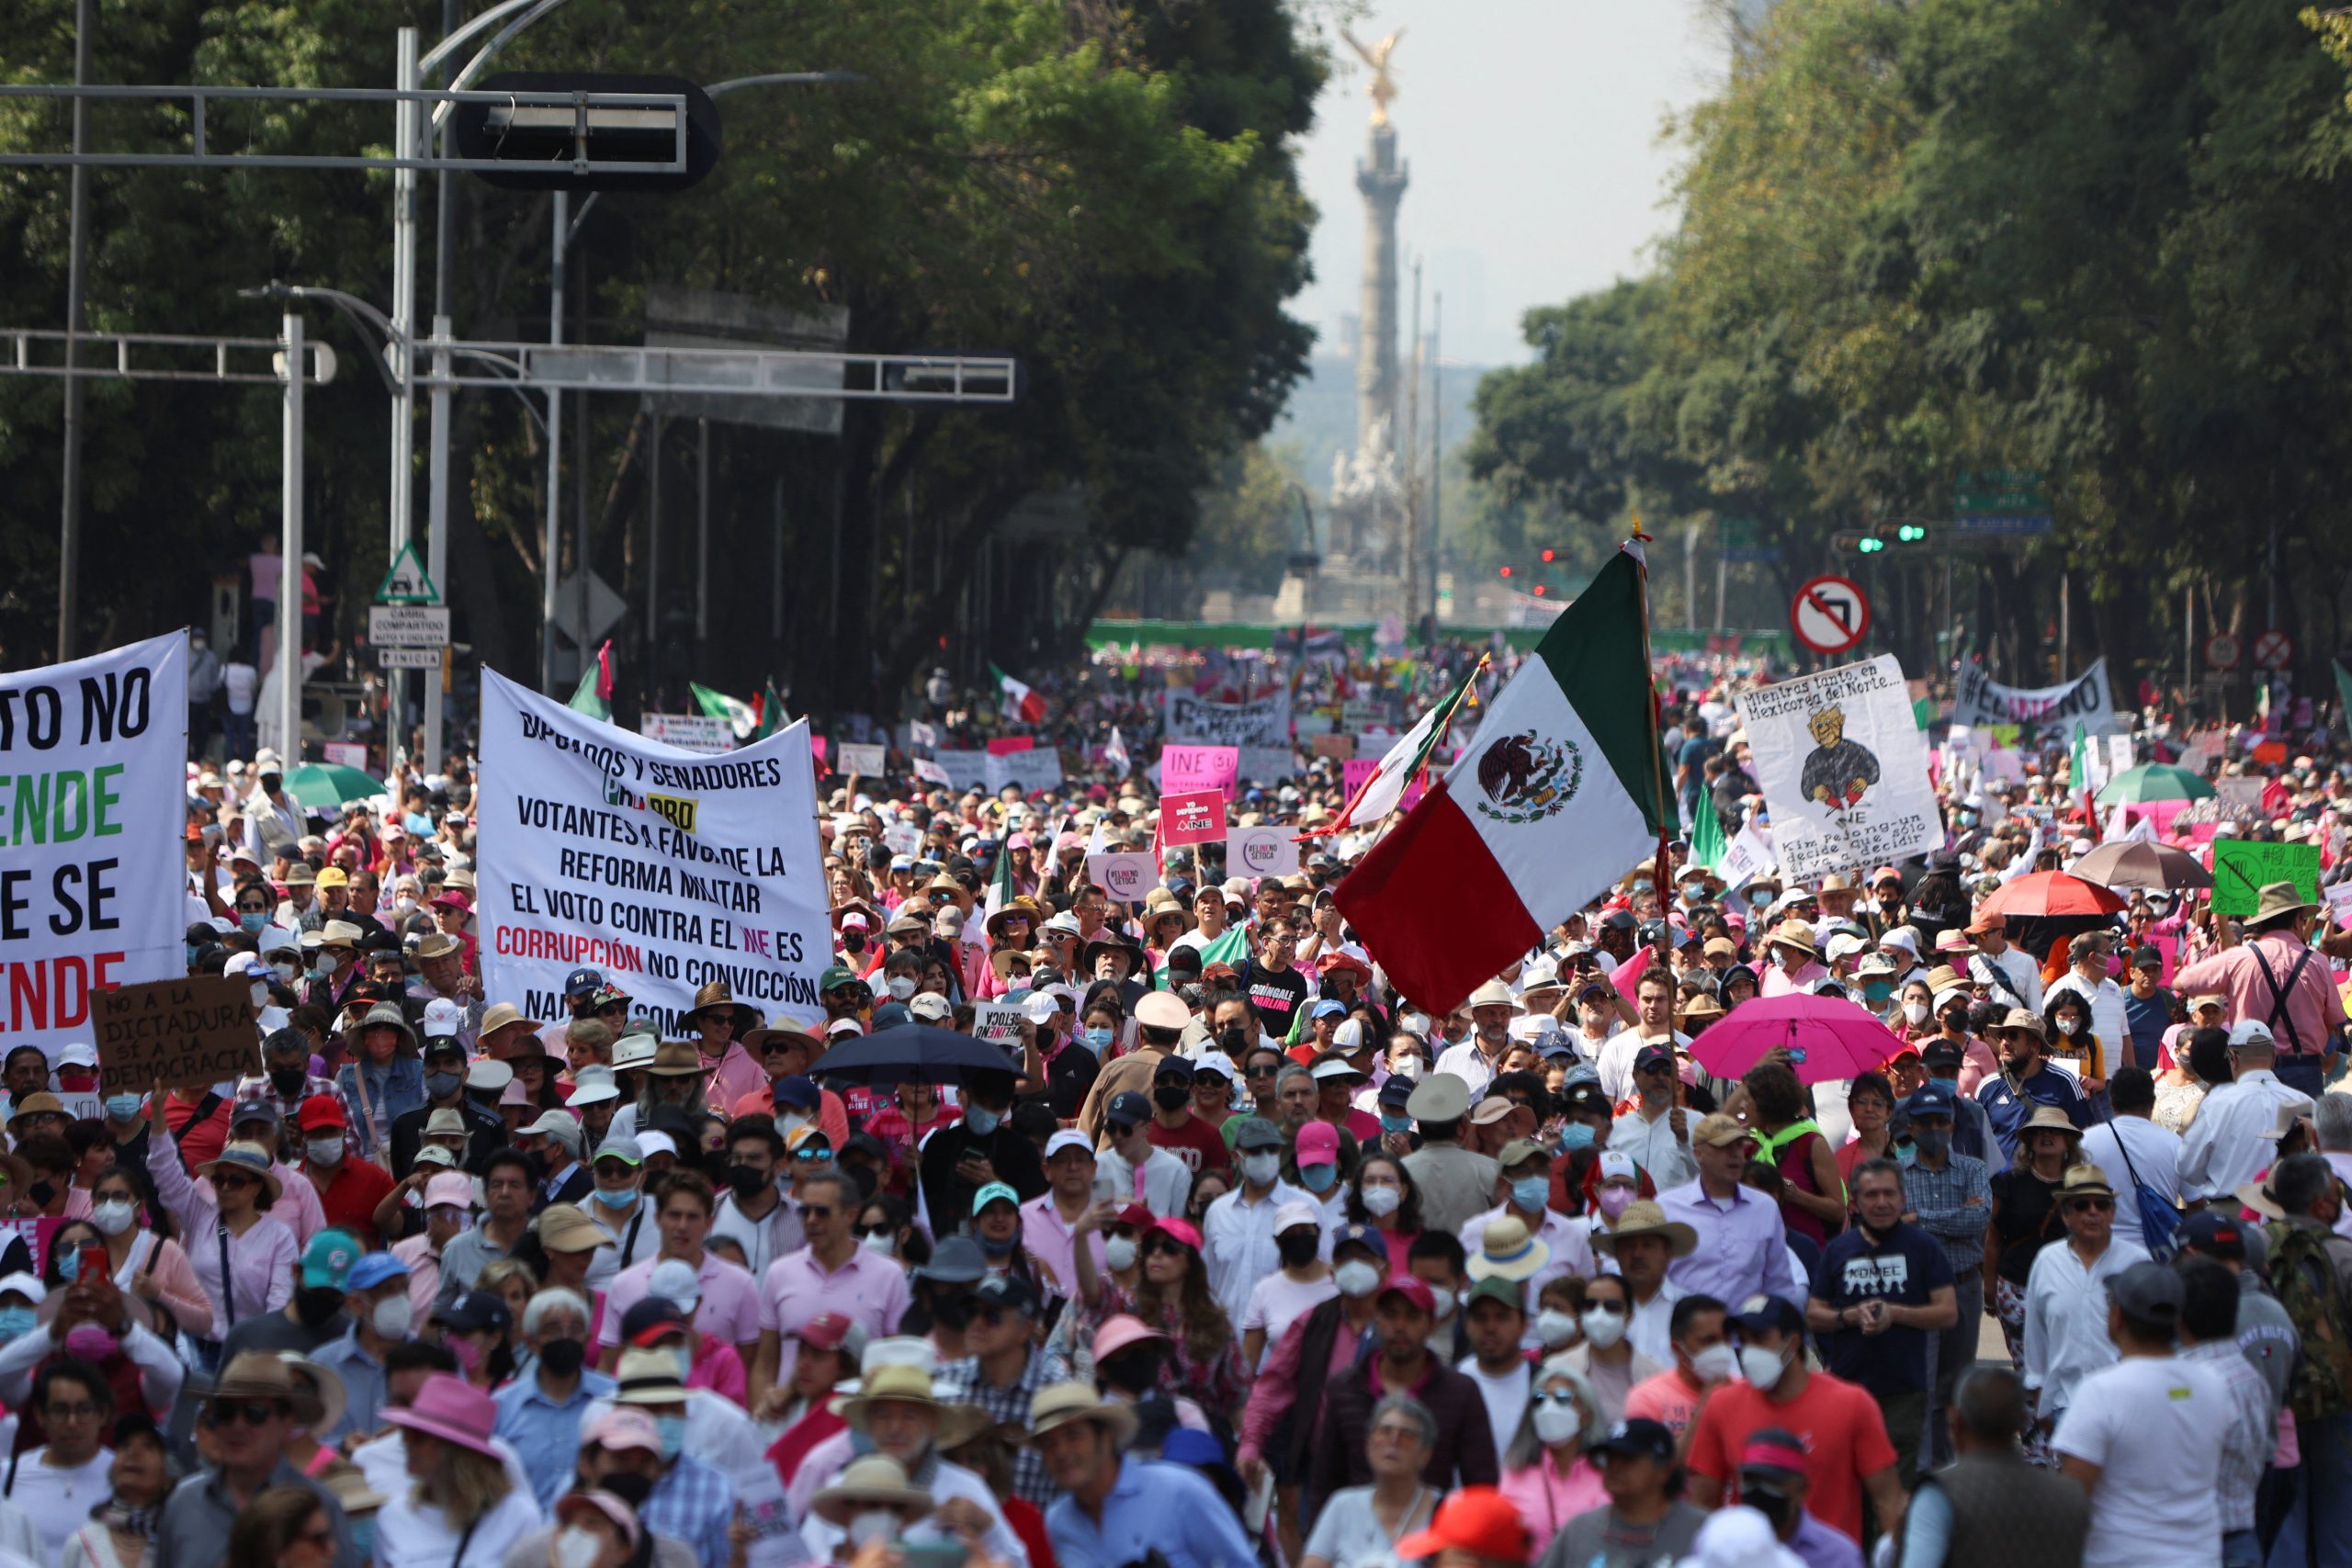 Tens of Thousands Protest Mexico President's LeftWing Election Overhaul